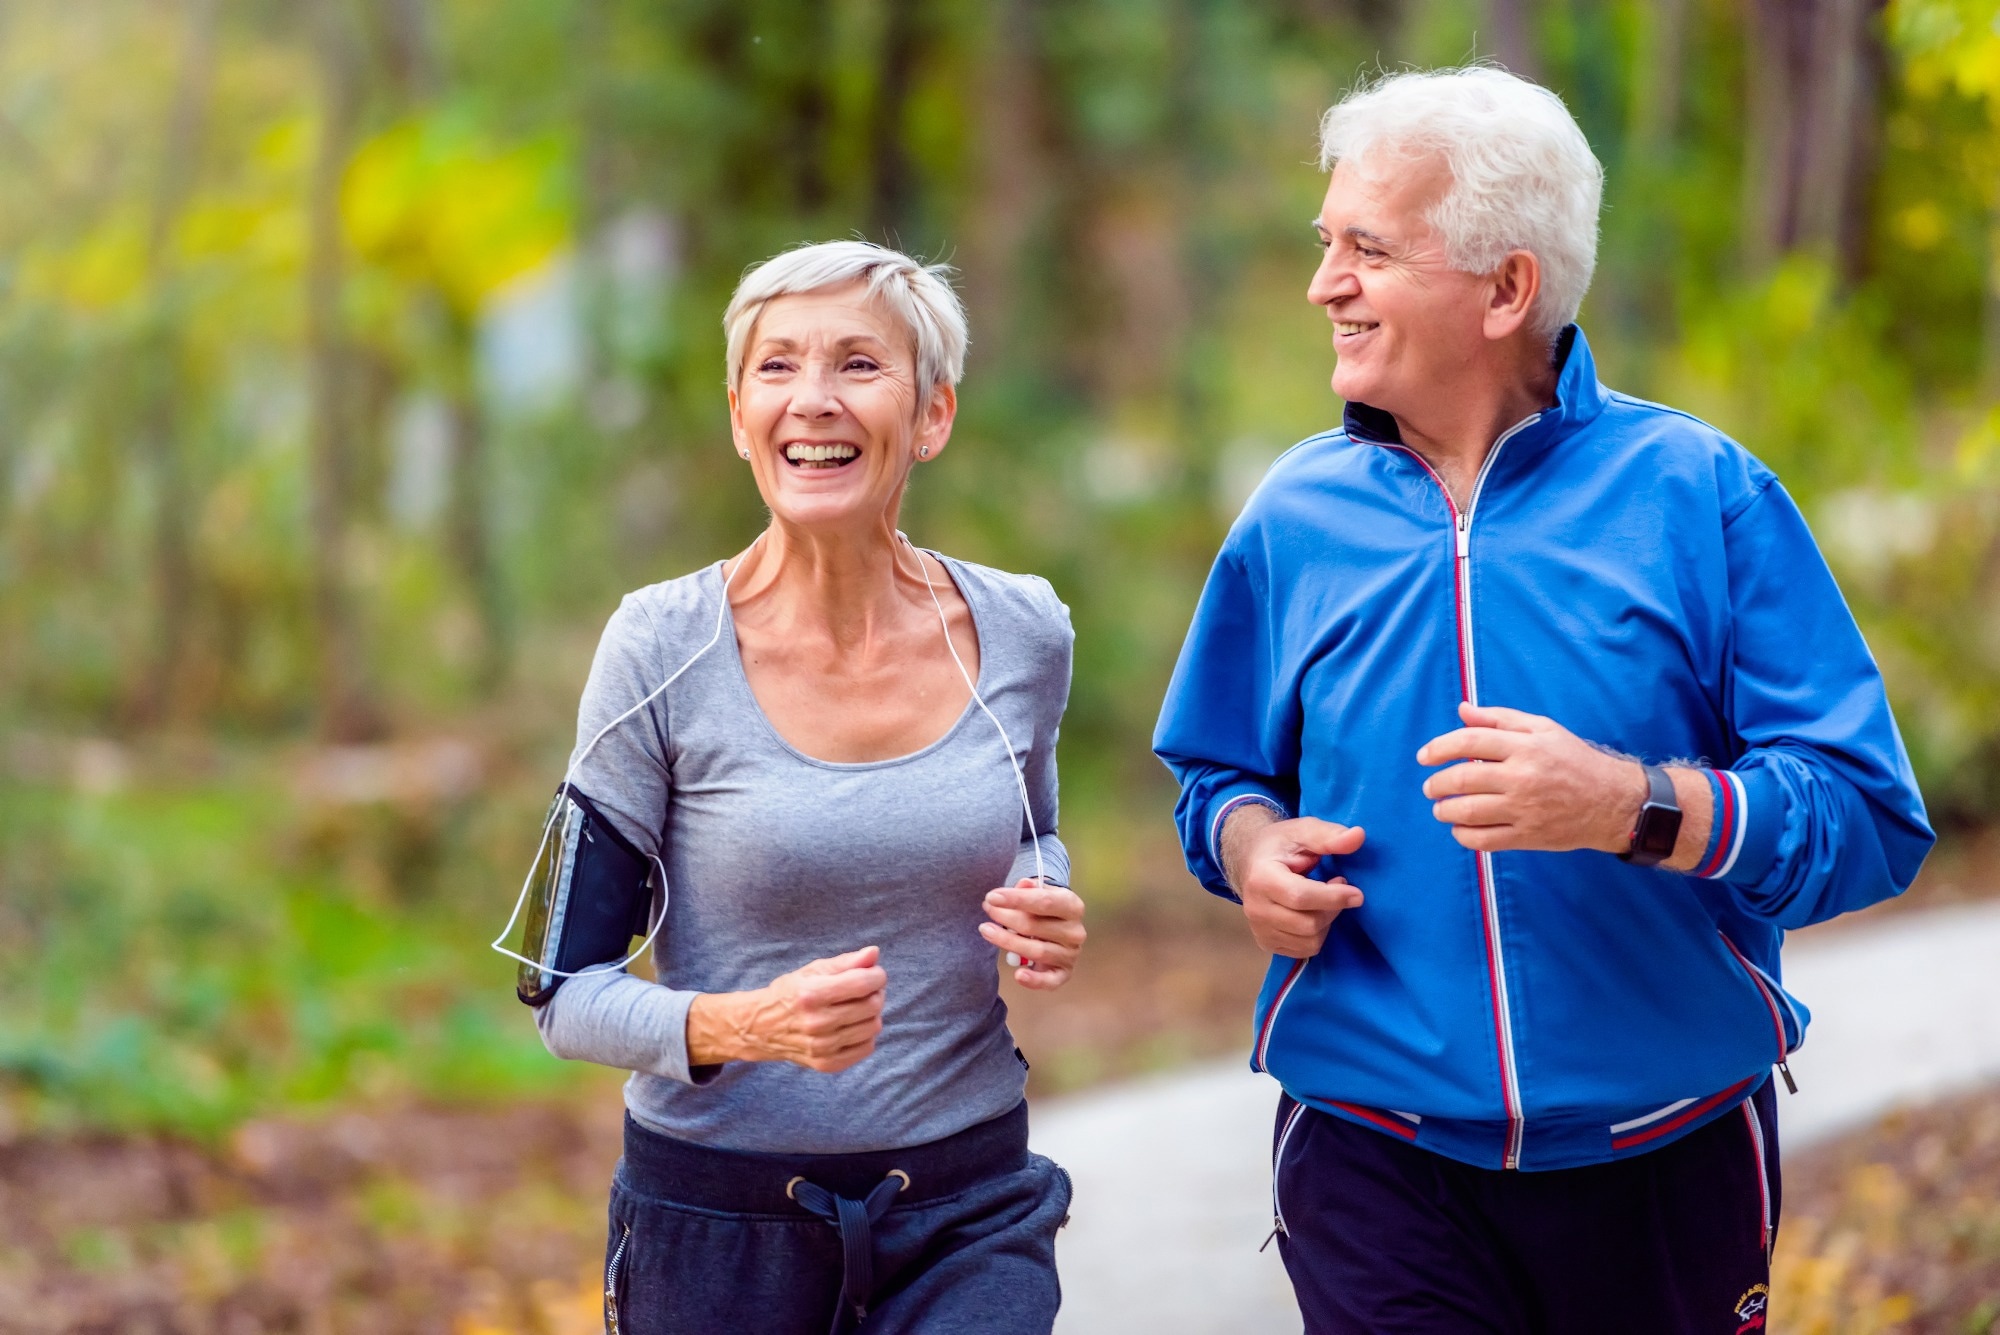 Study: Association of Leisure Time Physical Activity Types and Risks of All-Cause, Cardiovascular, and Cancer Mortality Among Older Adults. Image Credit: Lordn/Shutterstock